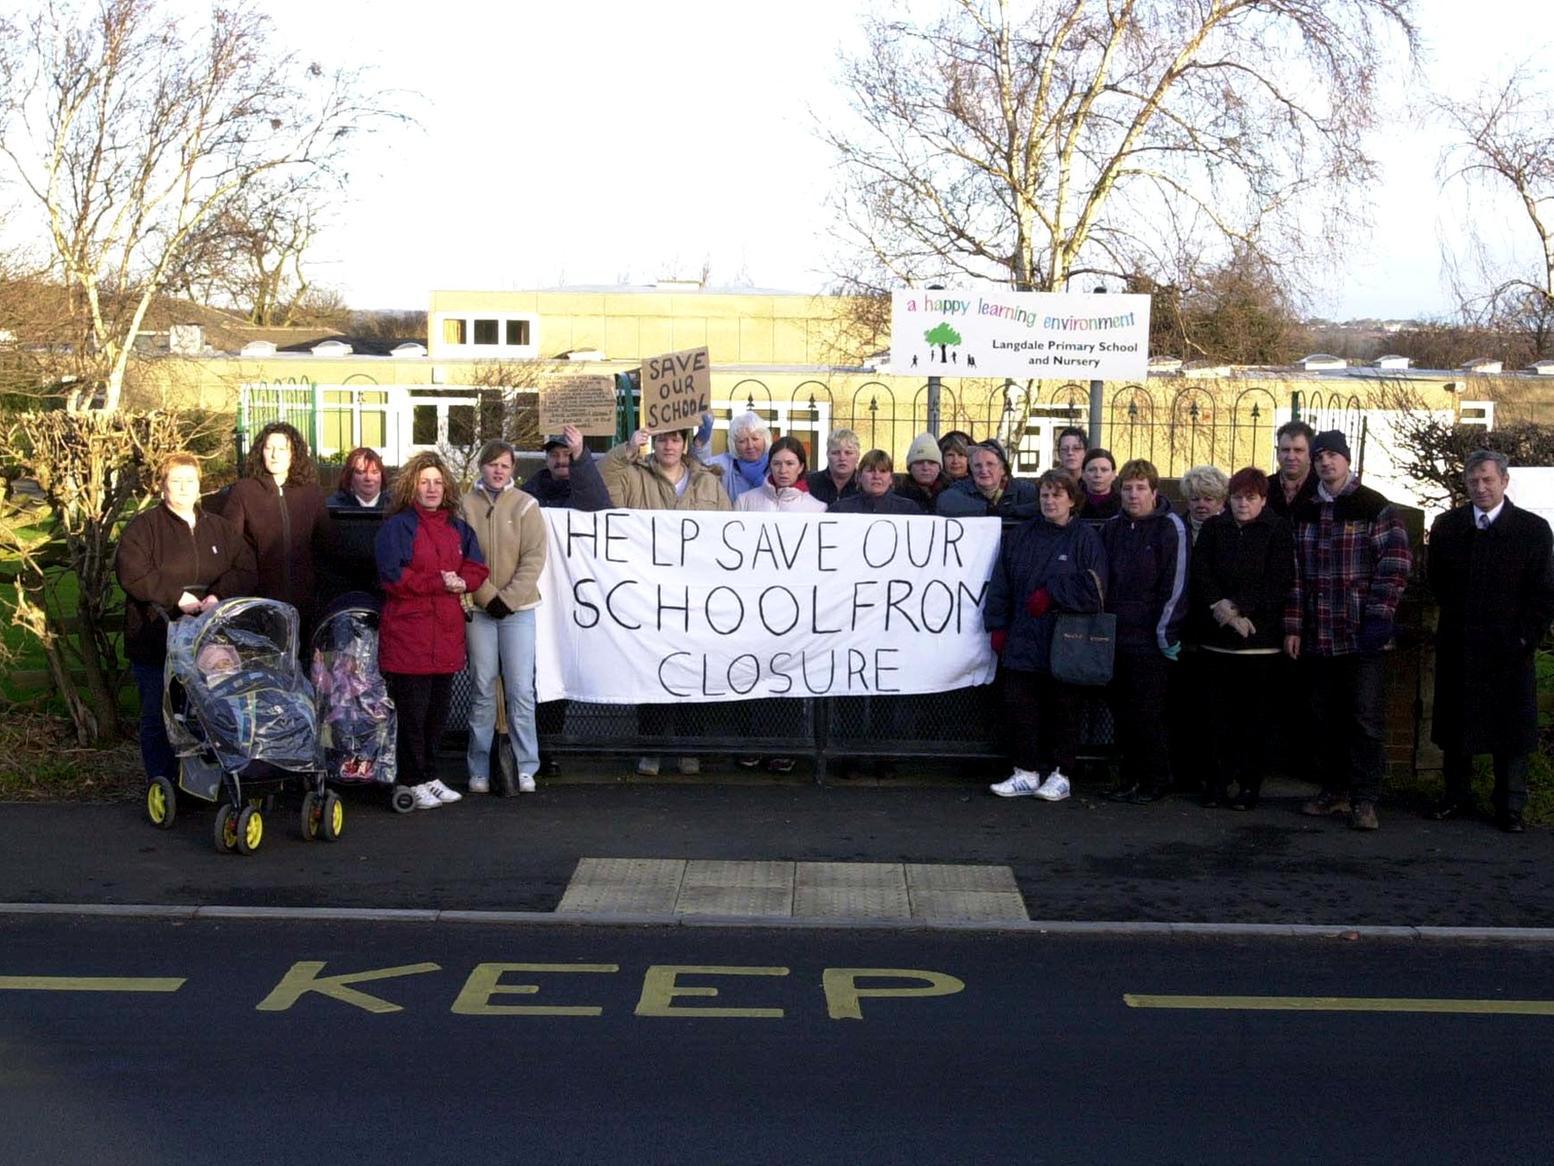 Parents from Langdale Primary in Woodlesford protested outside the school gates over its proposed closure.